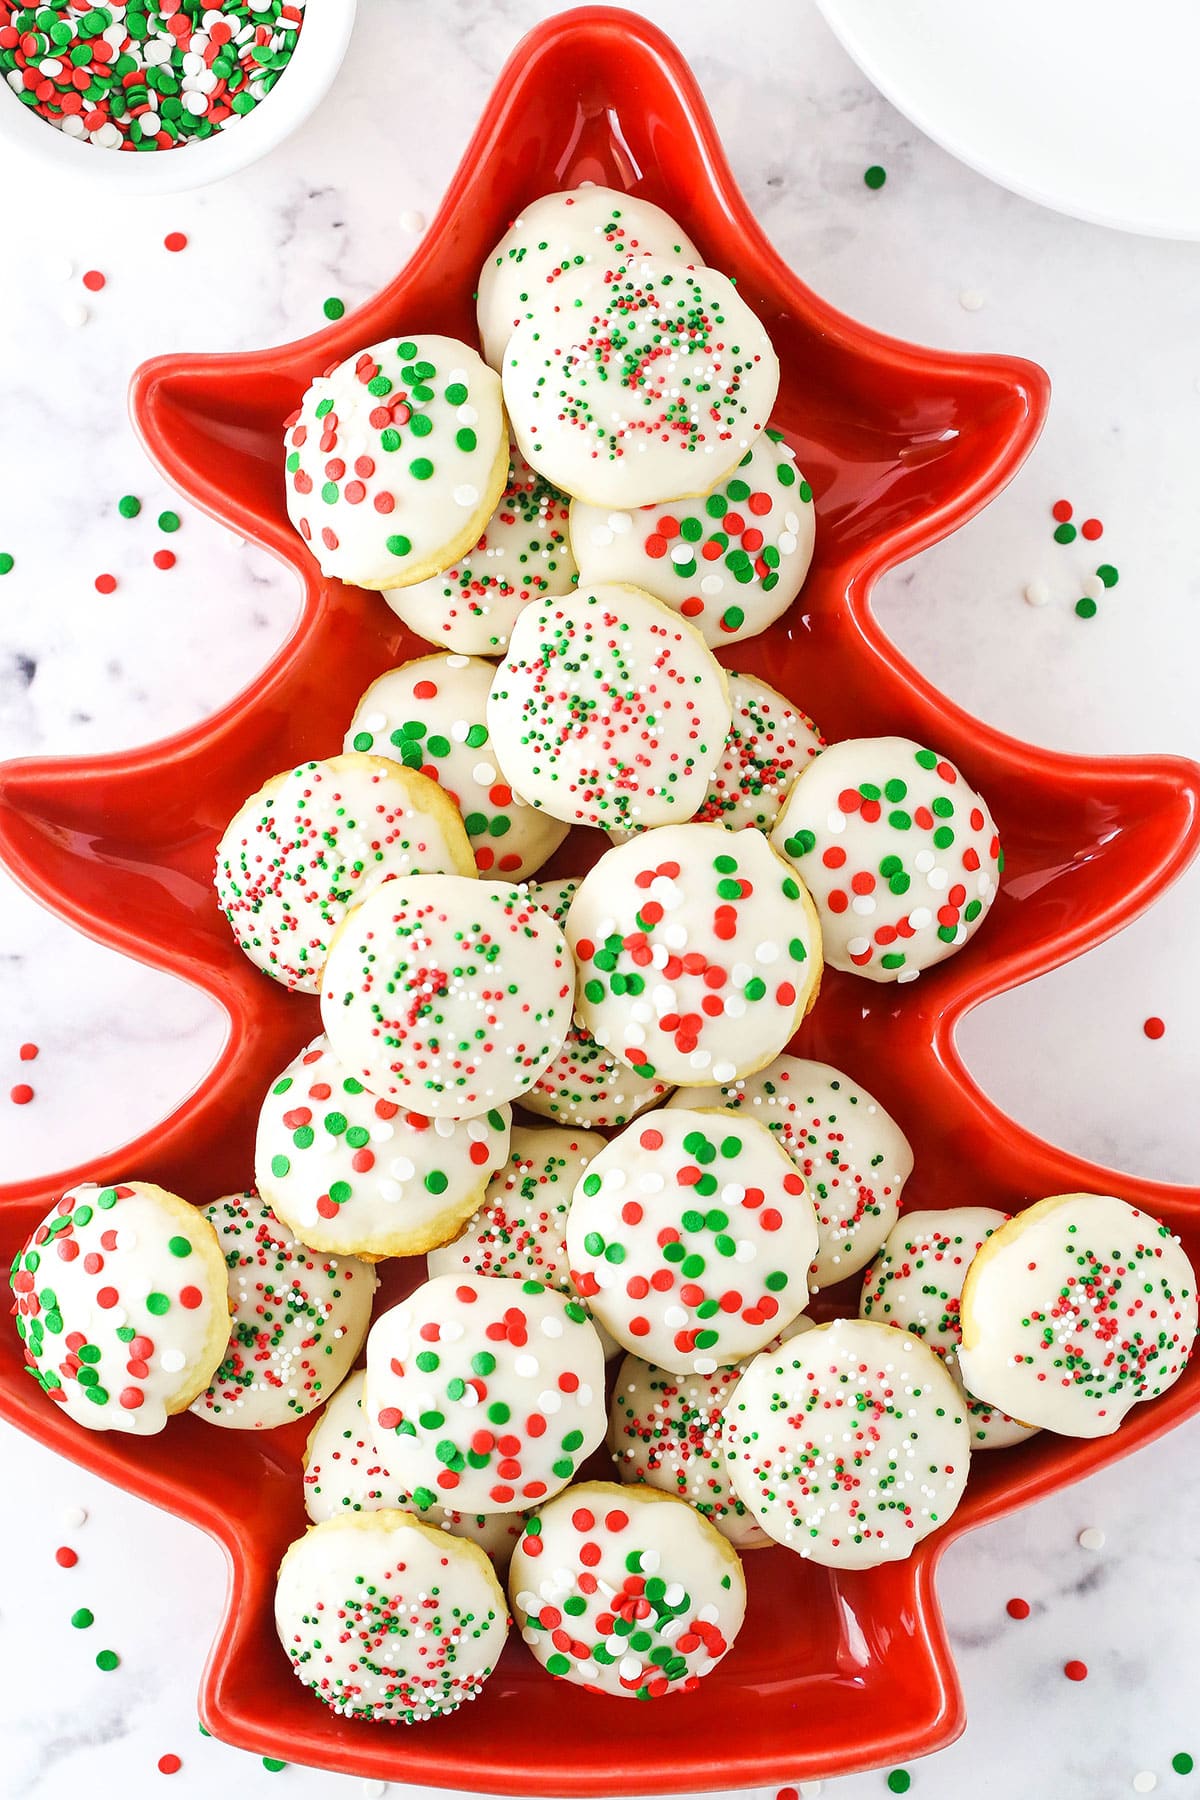 Italian Ricotta Cookies with red, green and white sprinkles layered in a red Christmas Tree shaped platter.